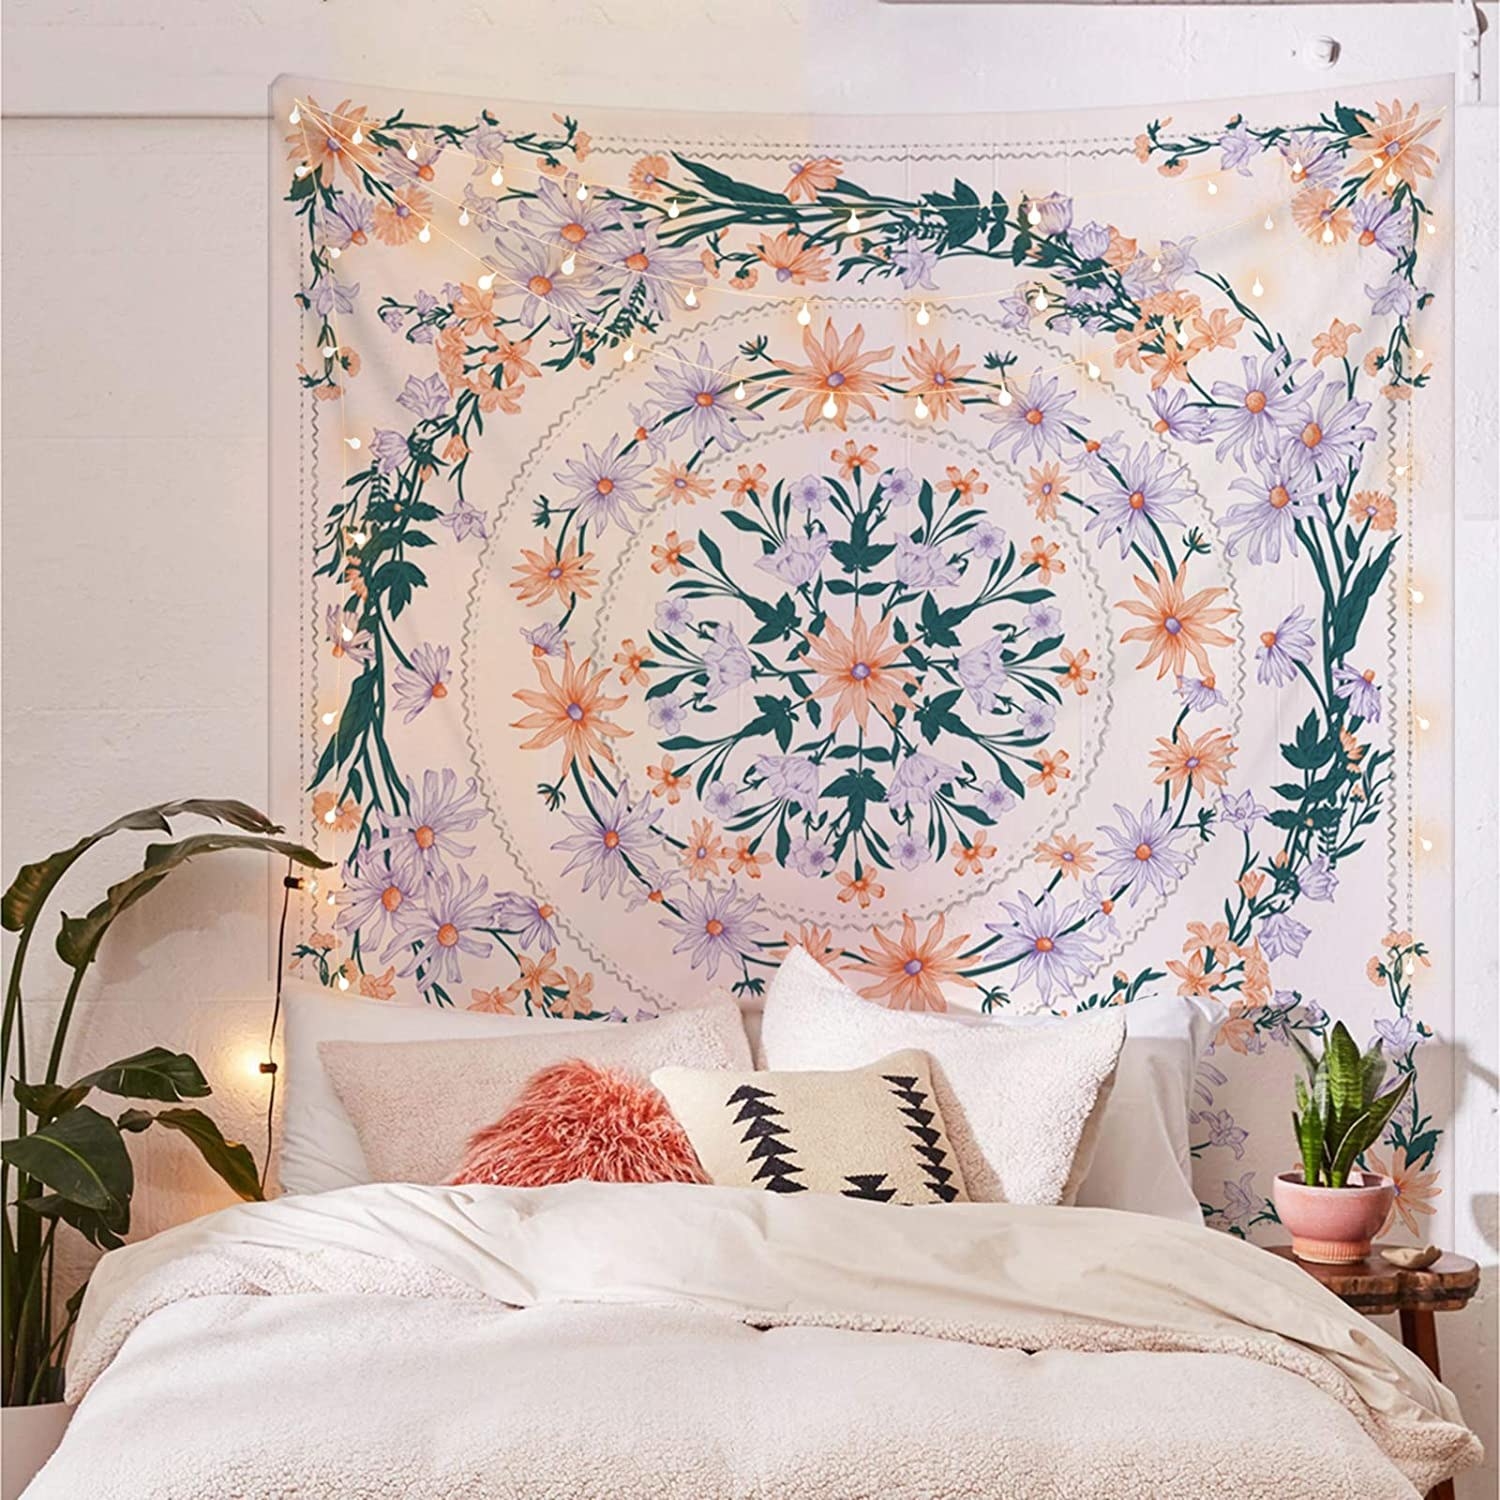 The tapestry behind a bed in a bedroom